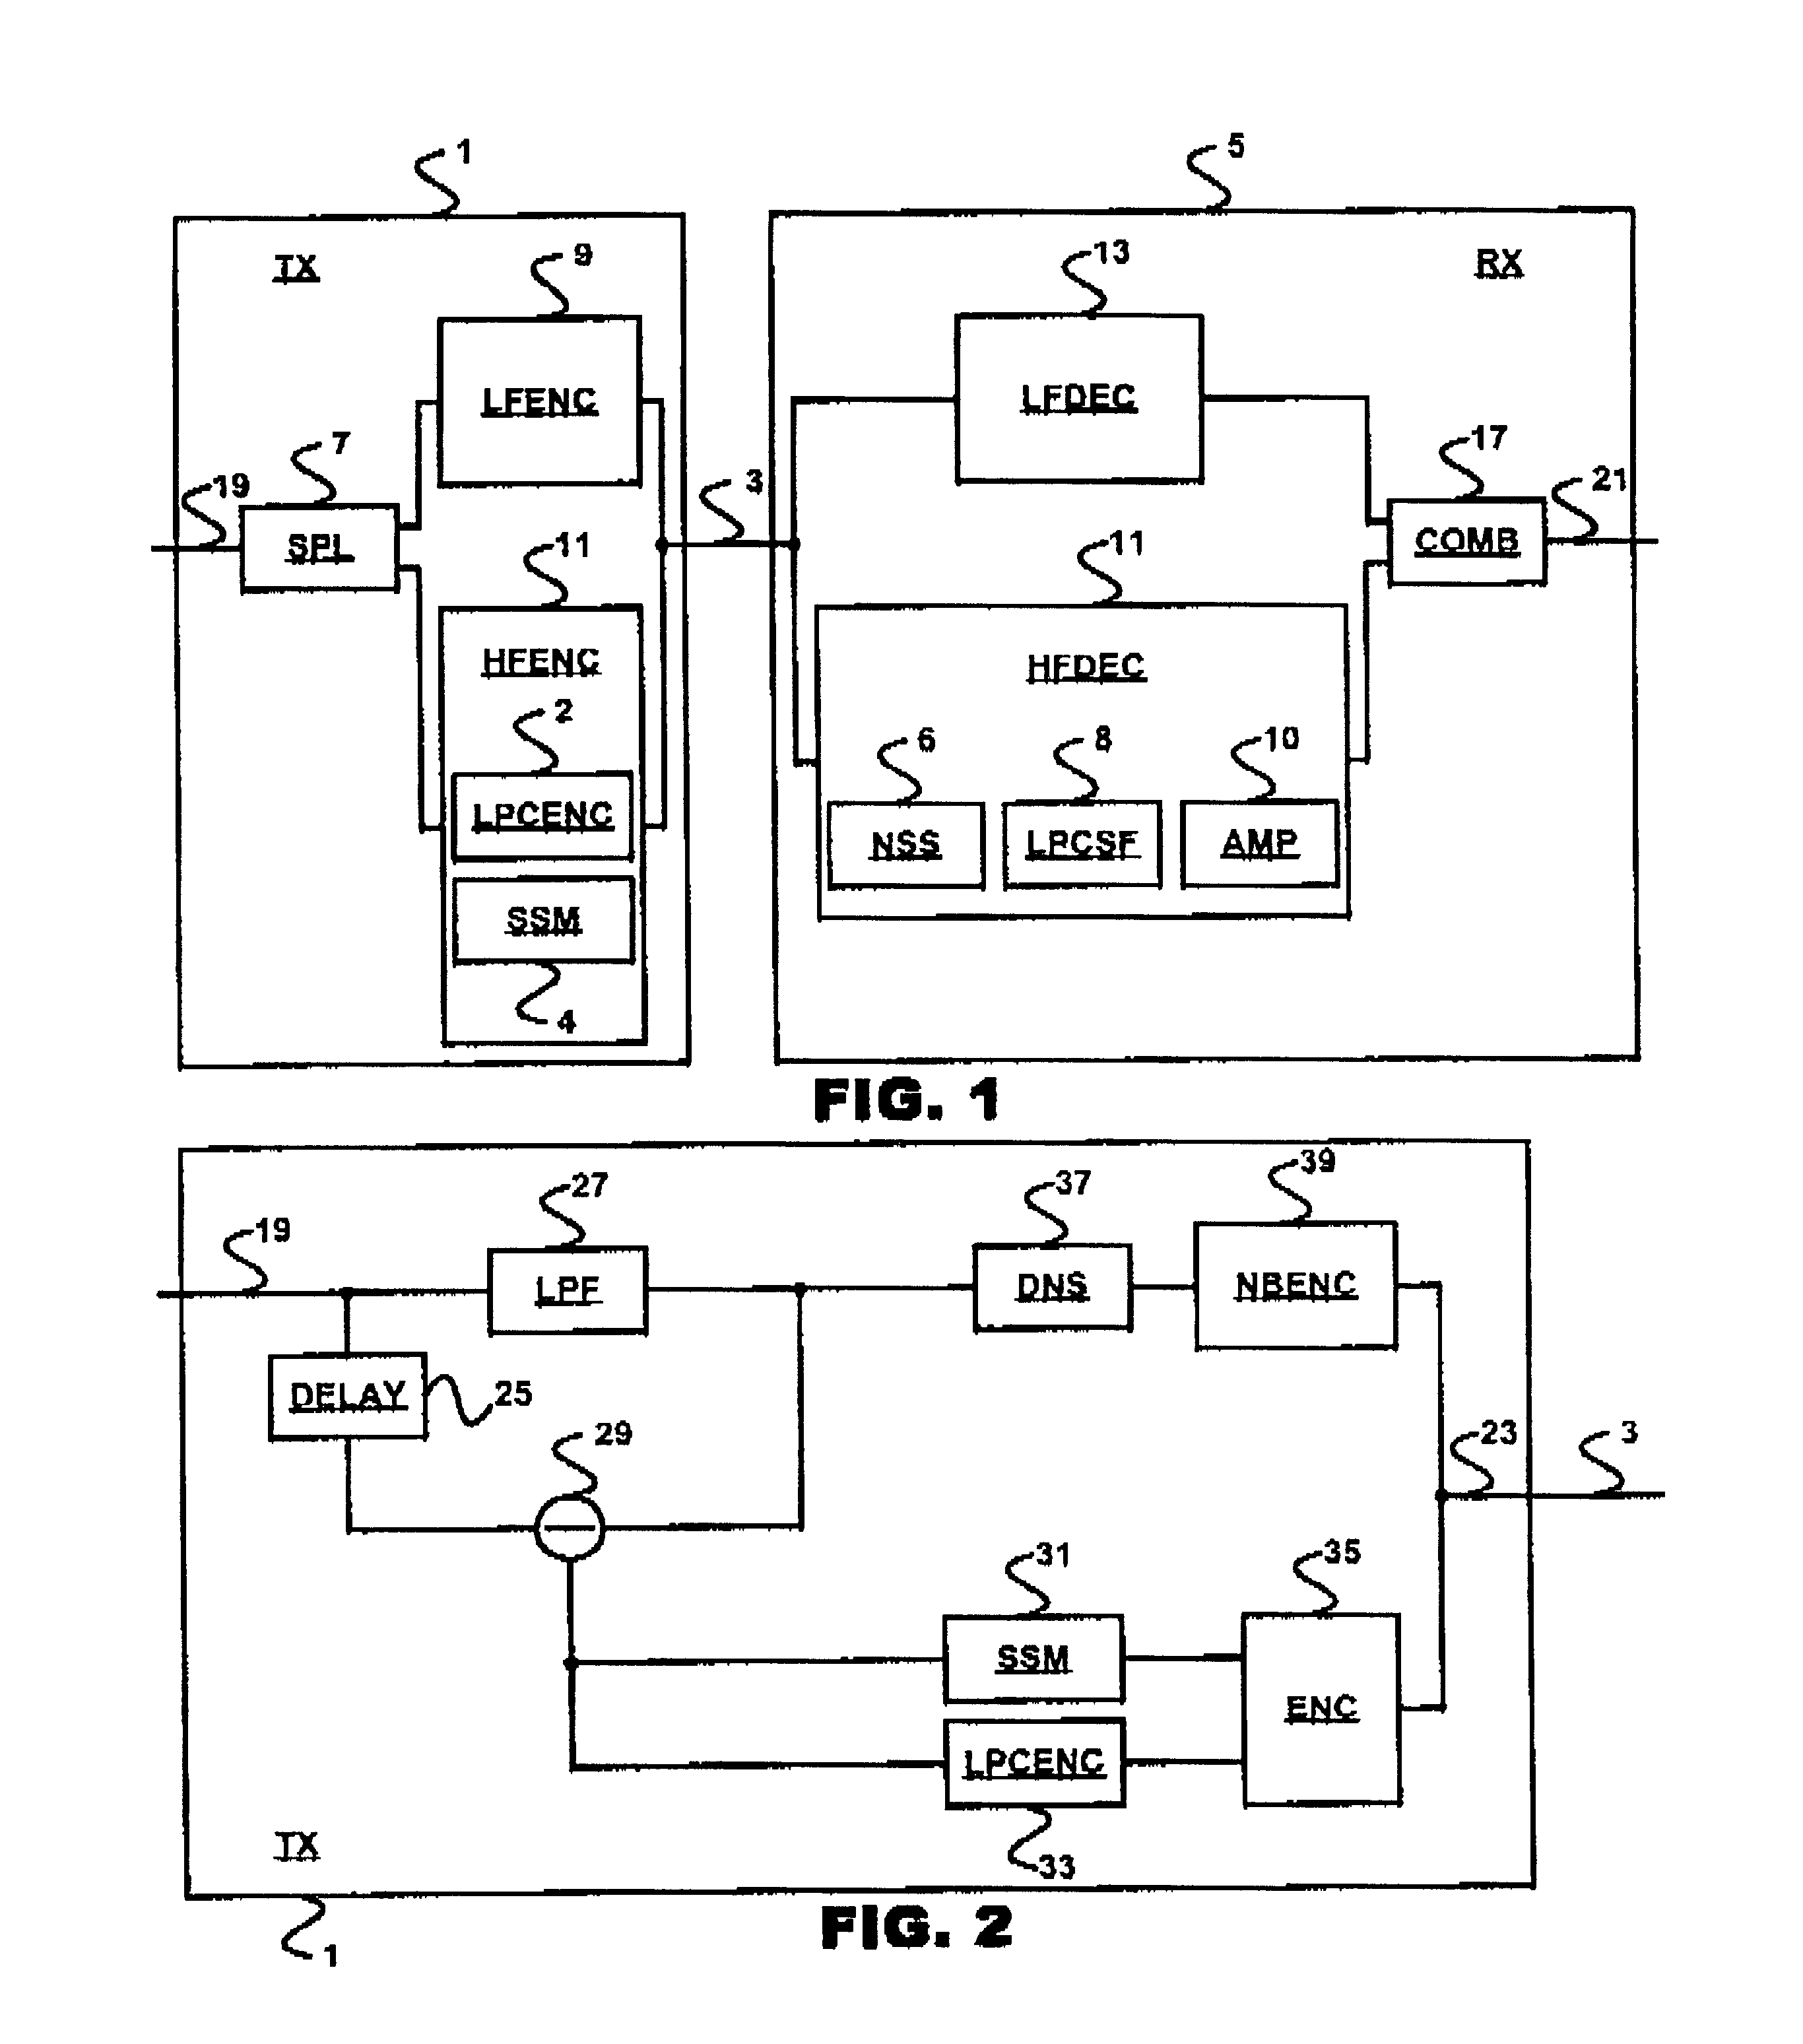 High frequency and low frequency audio signal encoding and decoding system